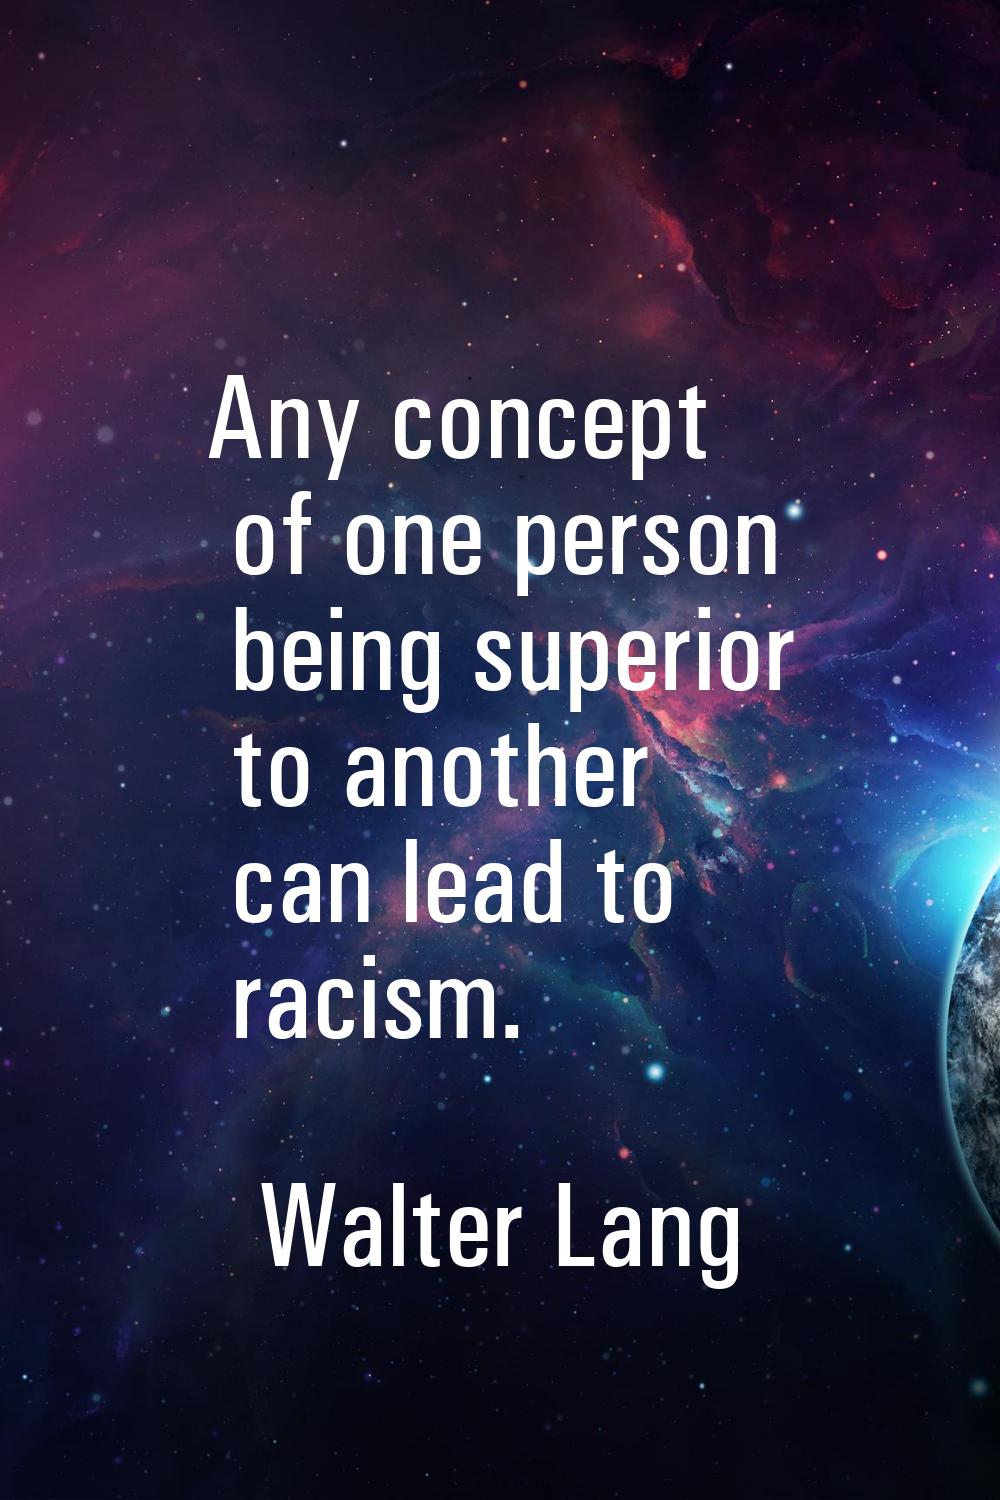 Any concept of one person being superior to another can lead to racism.